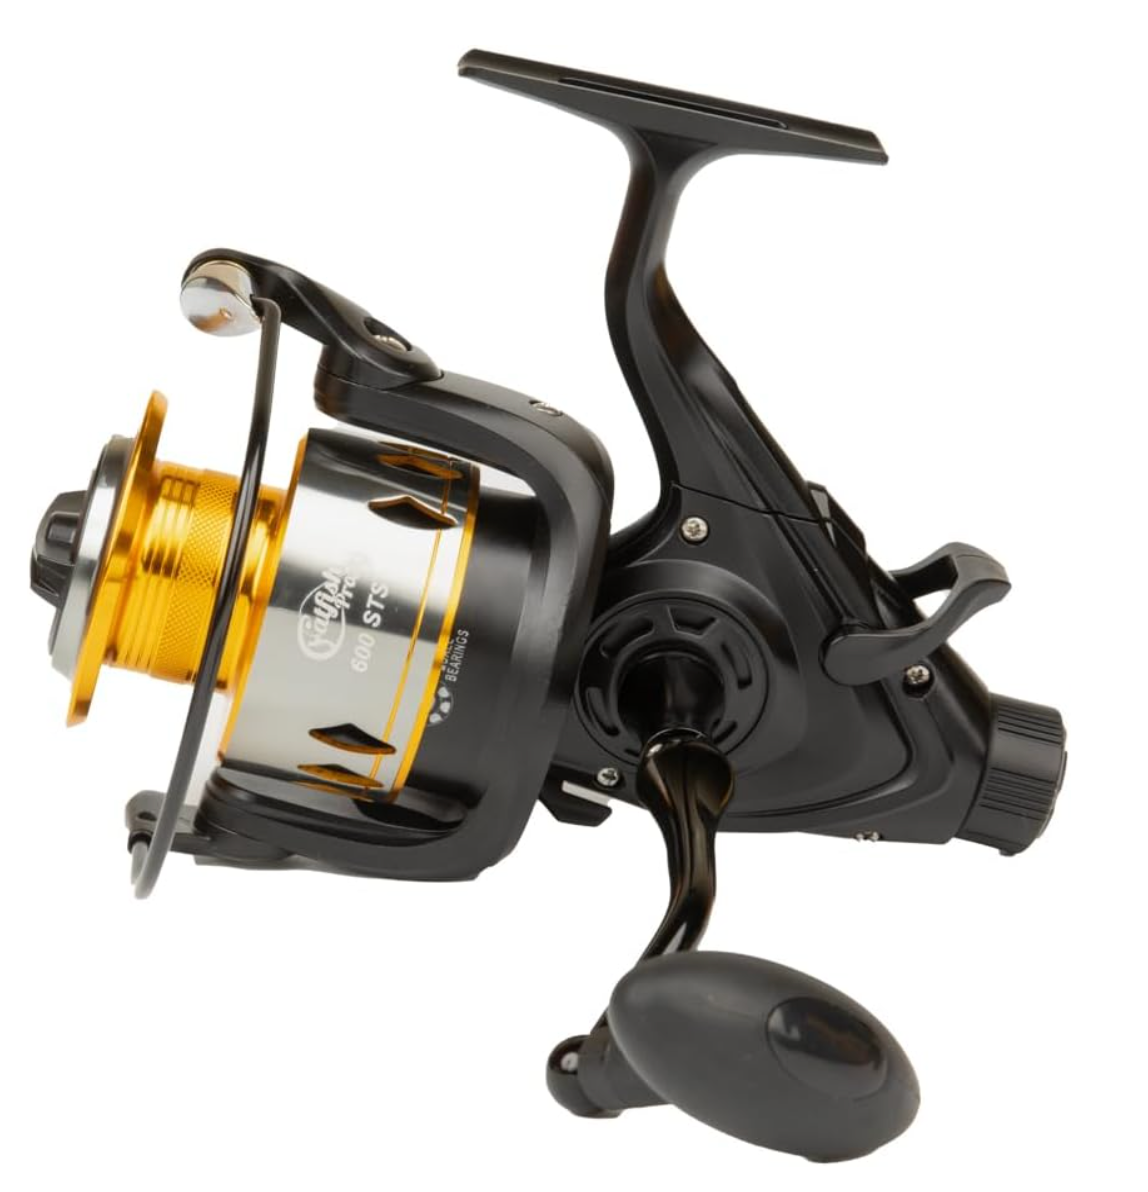 Check out our wide range of high quality Spinning Reels Shimano FX